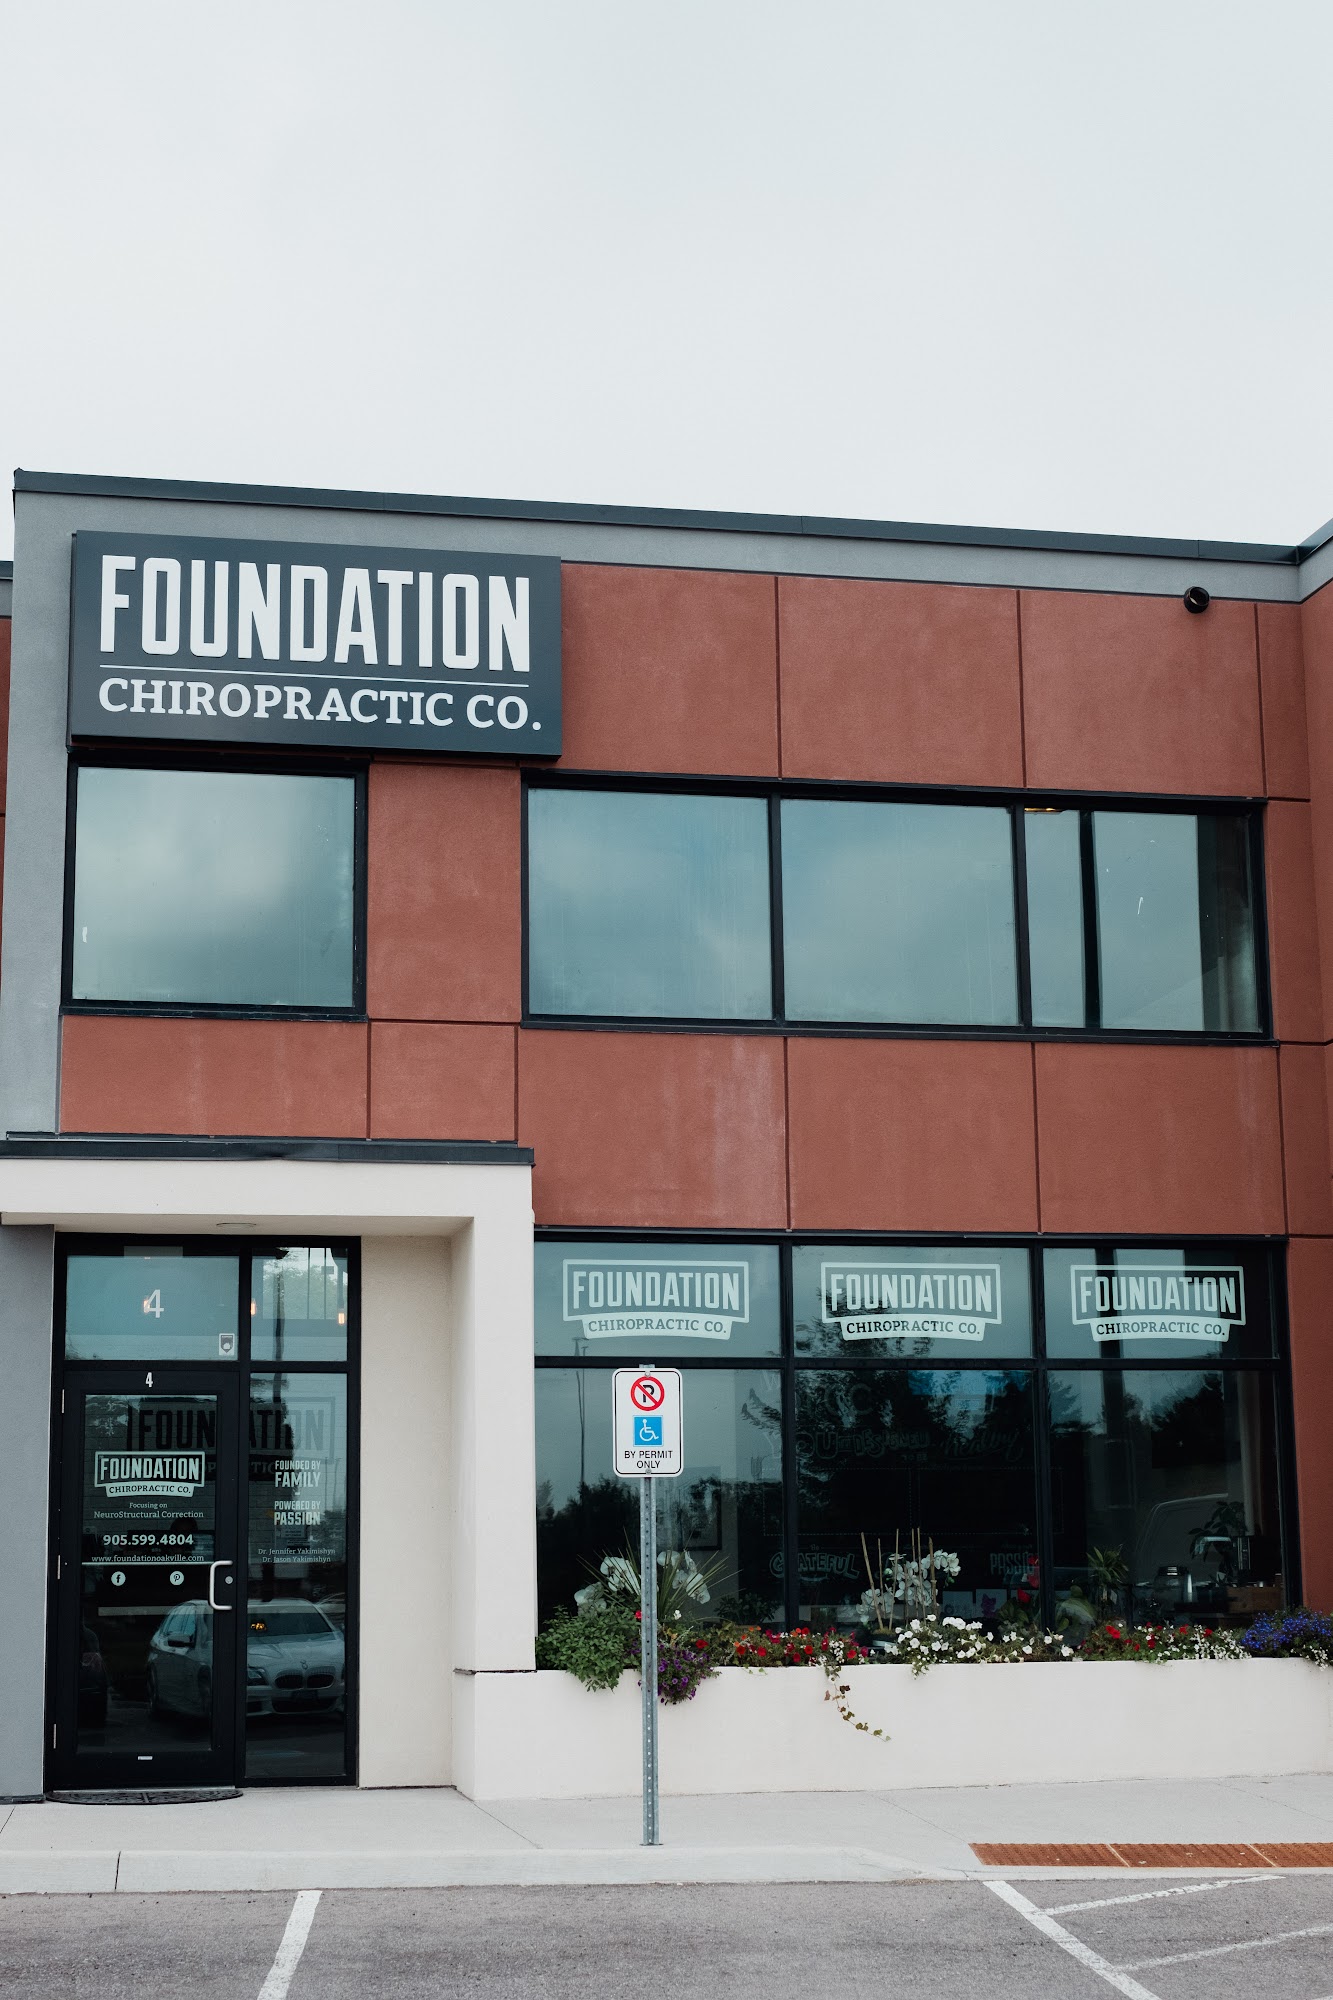 Foundation Chiropractic Co.